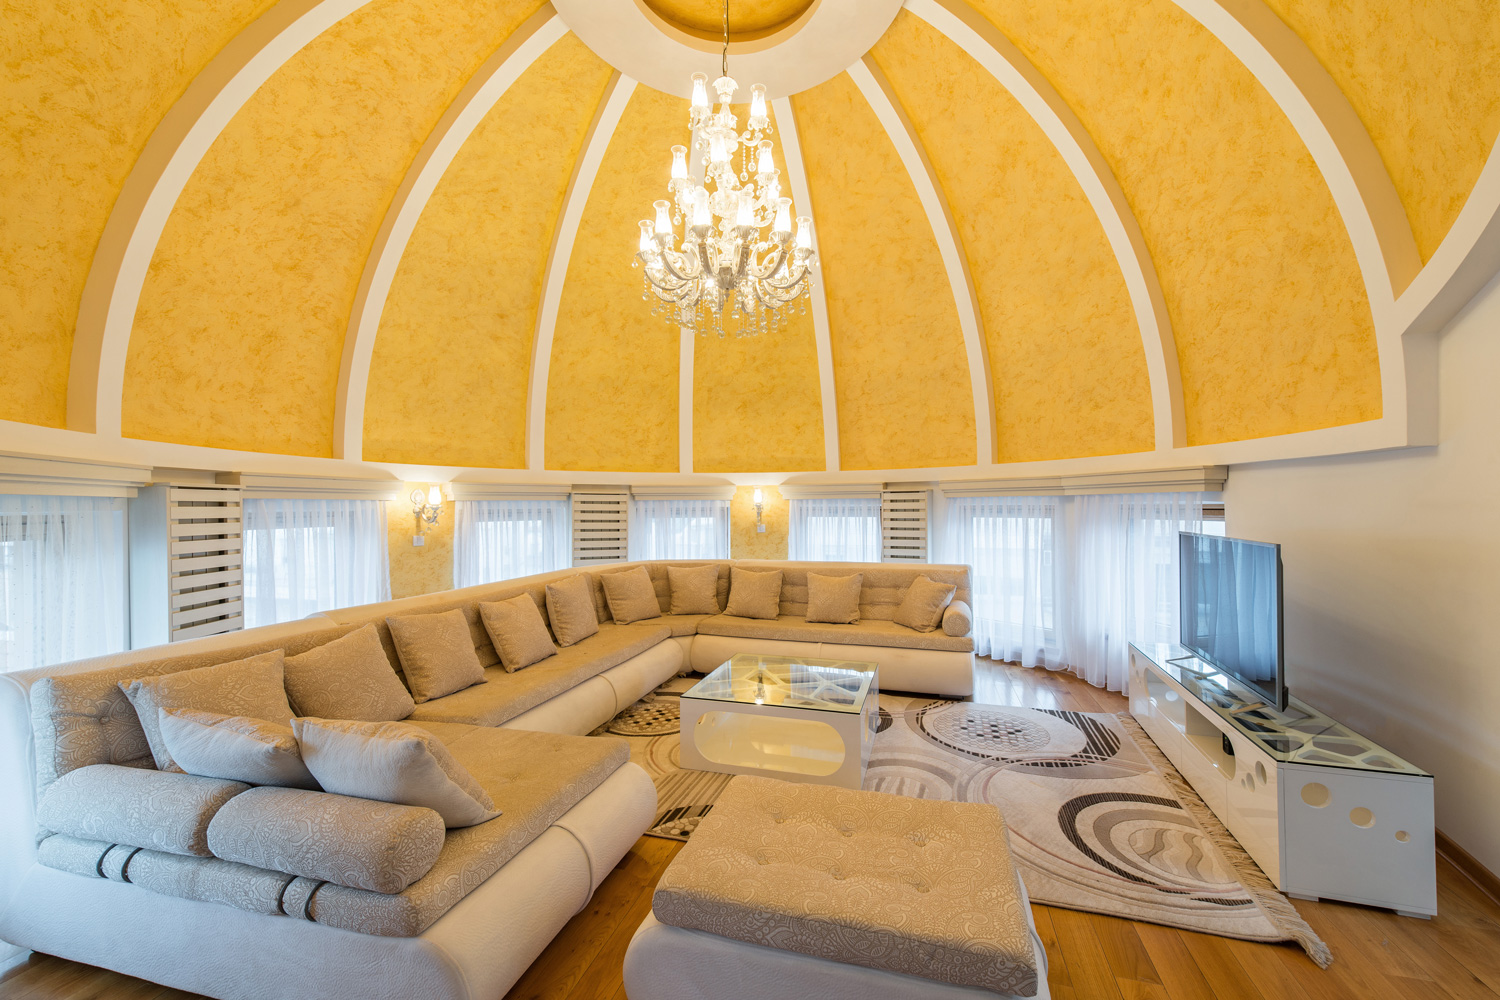 Interior of a luxury dome apartment villa, living room, domed ceiling, open plan